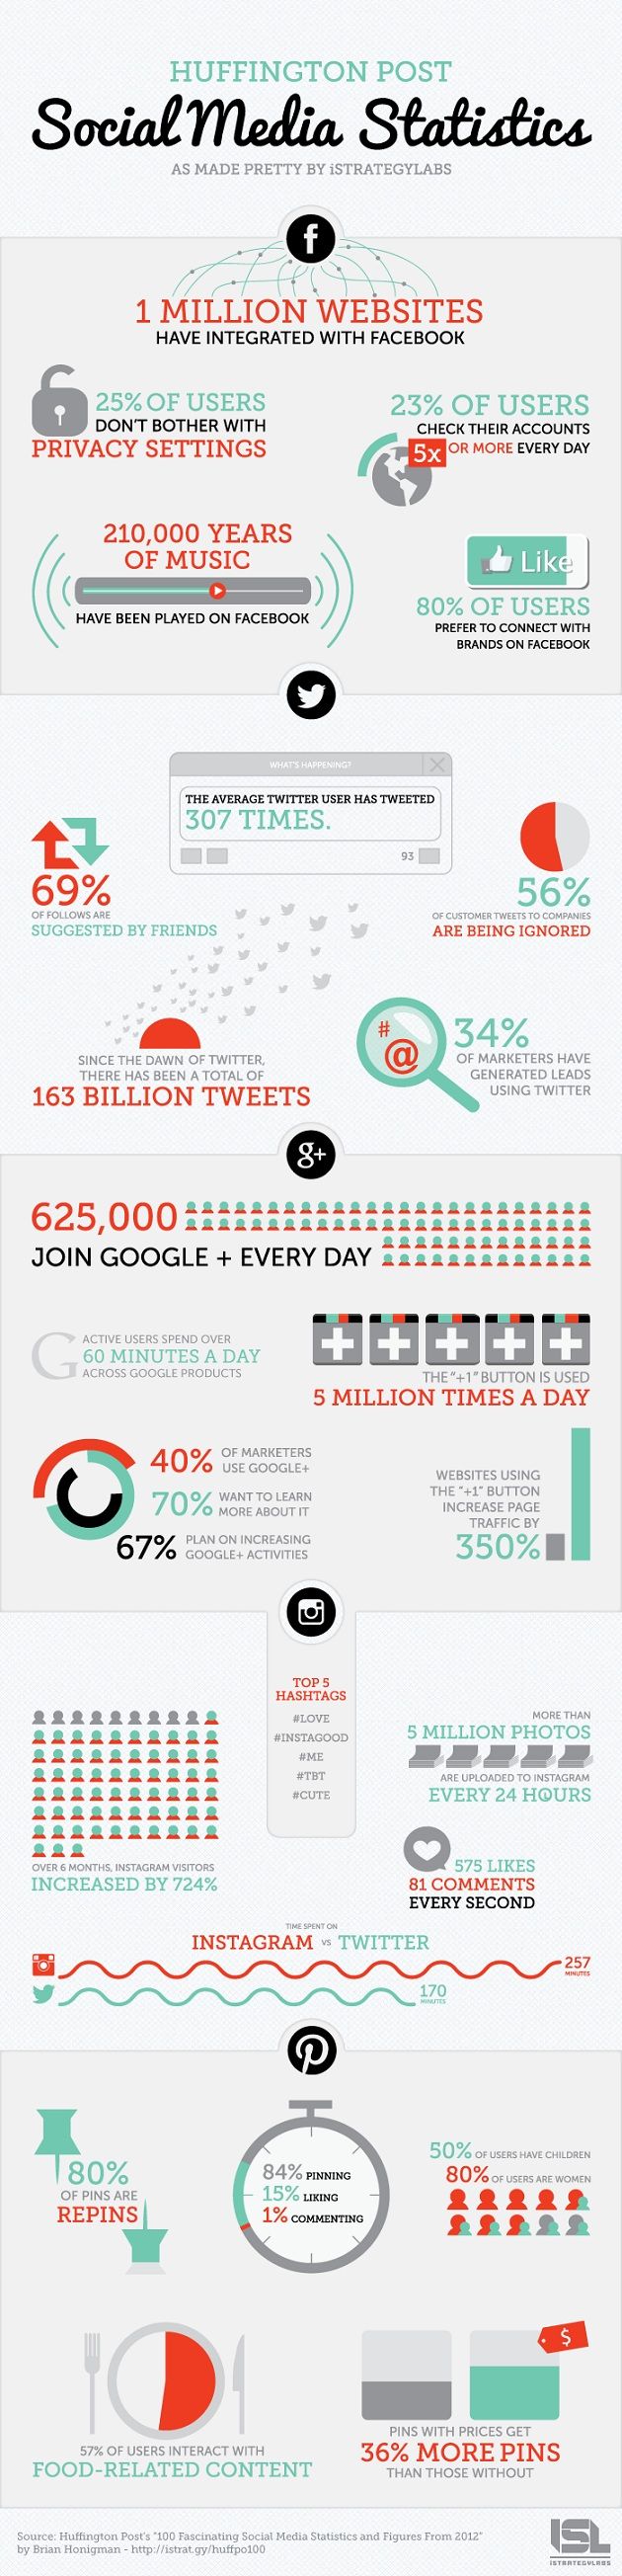 #Infographic: 365 Days of Social Media